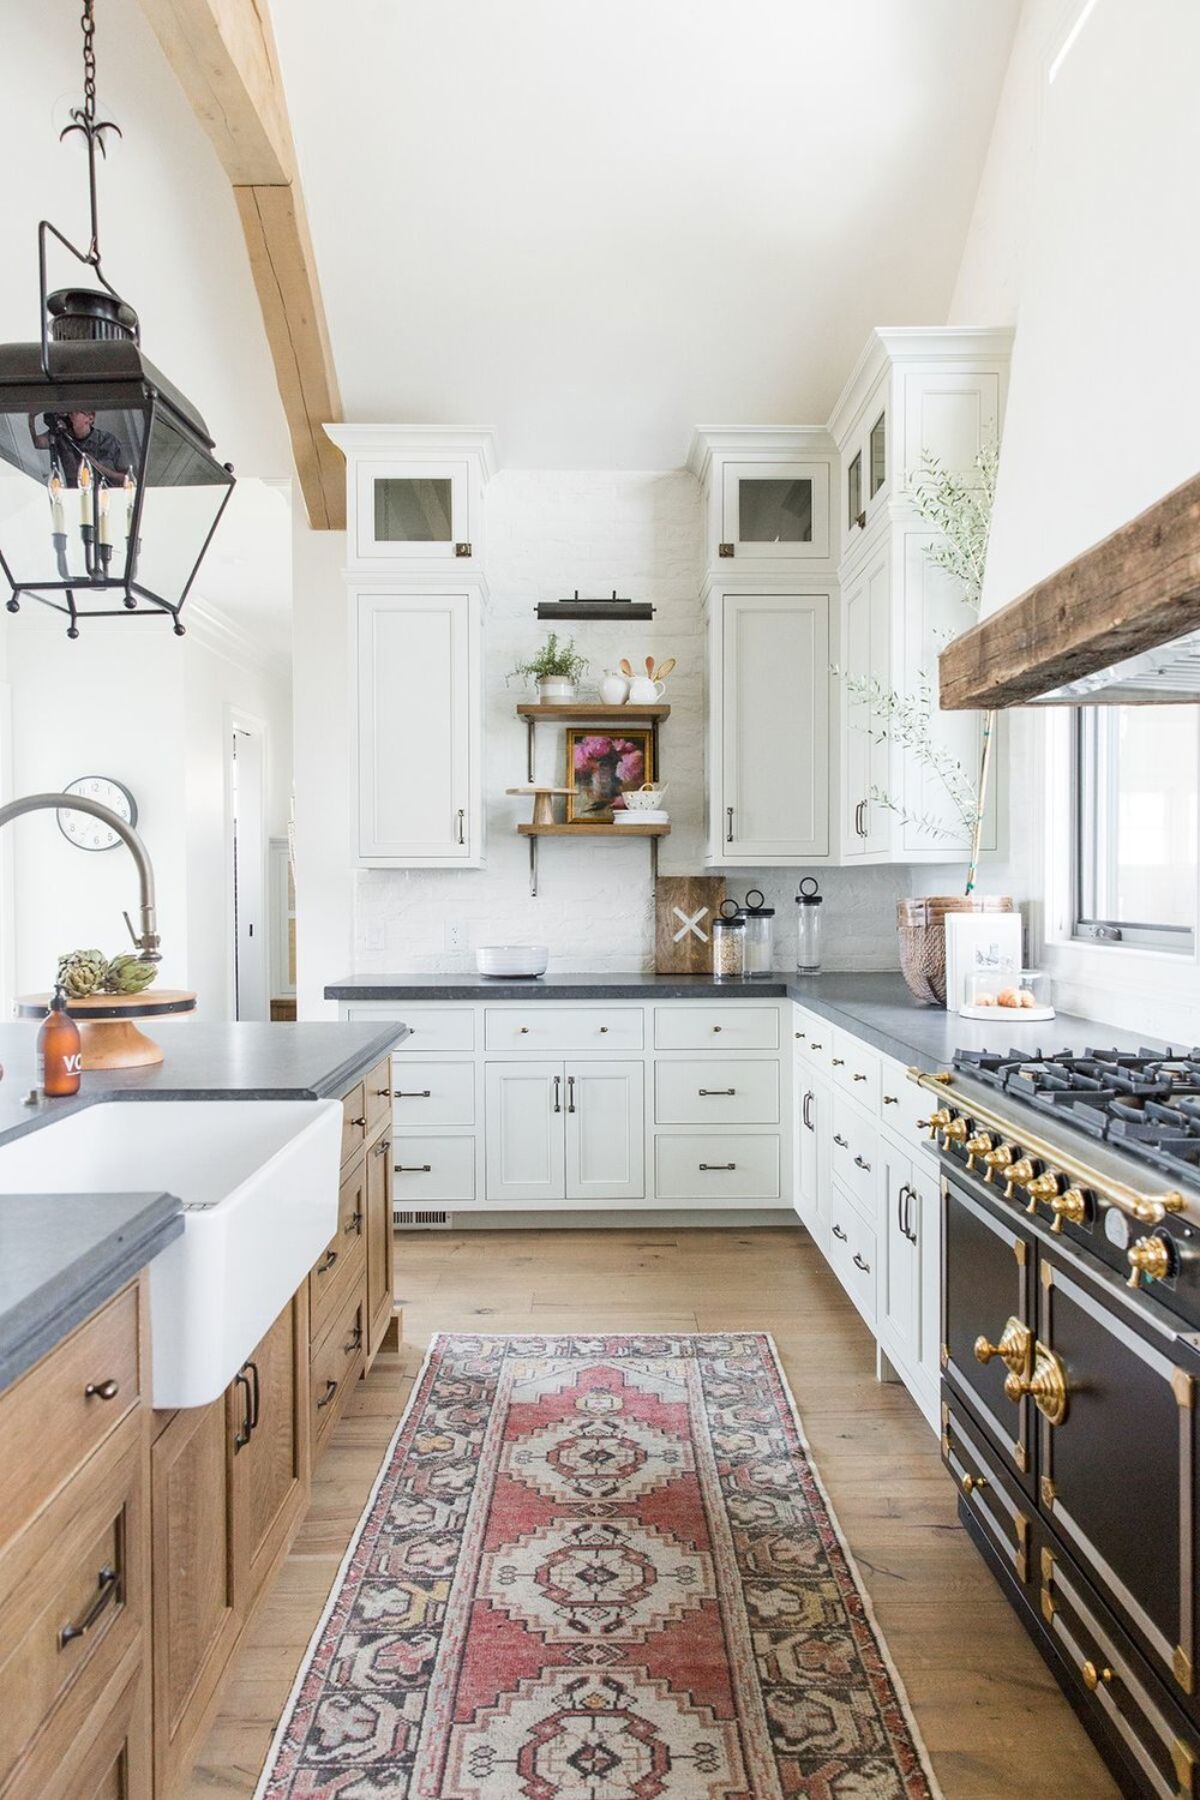 A modern farmhouse kitchen with white cabinets on one side of the kitchen with natural wood cabinets on the kitchen island.